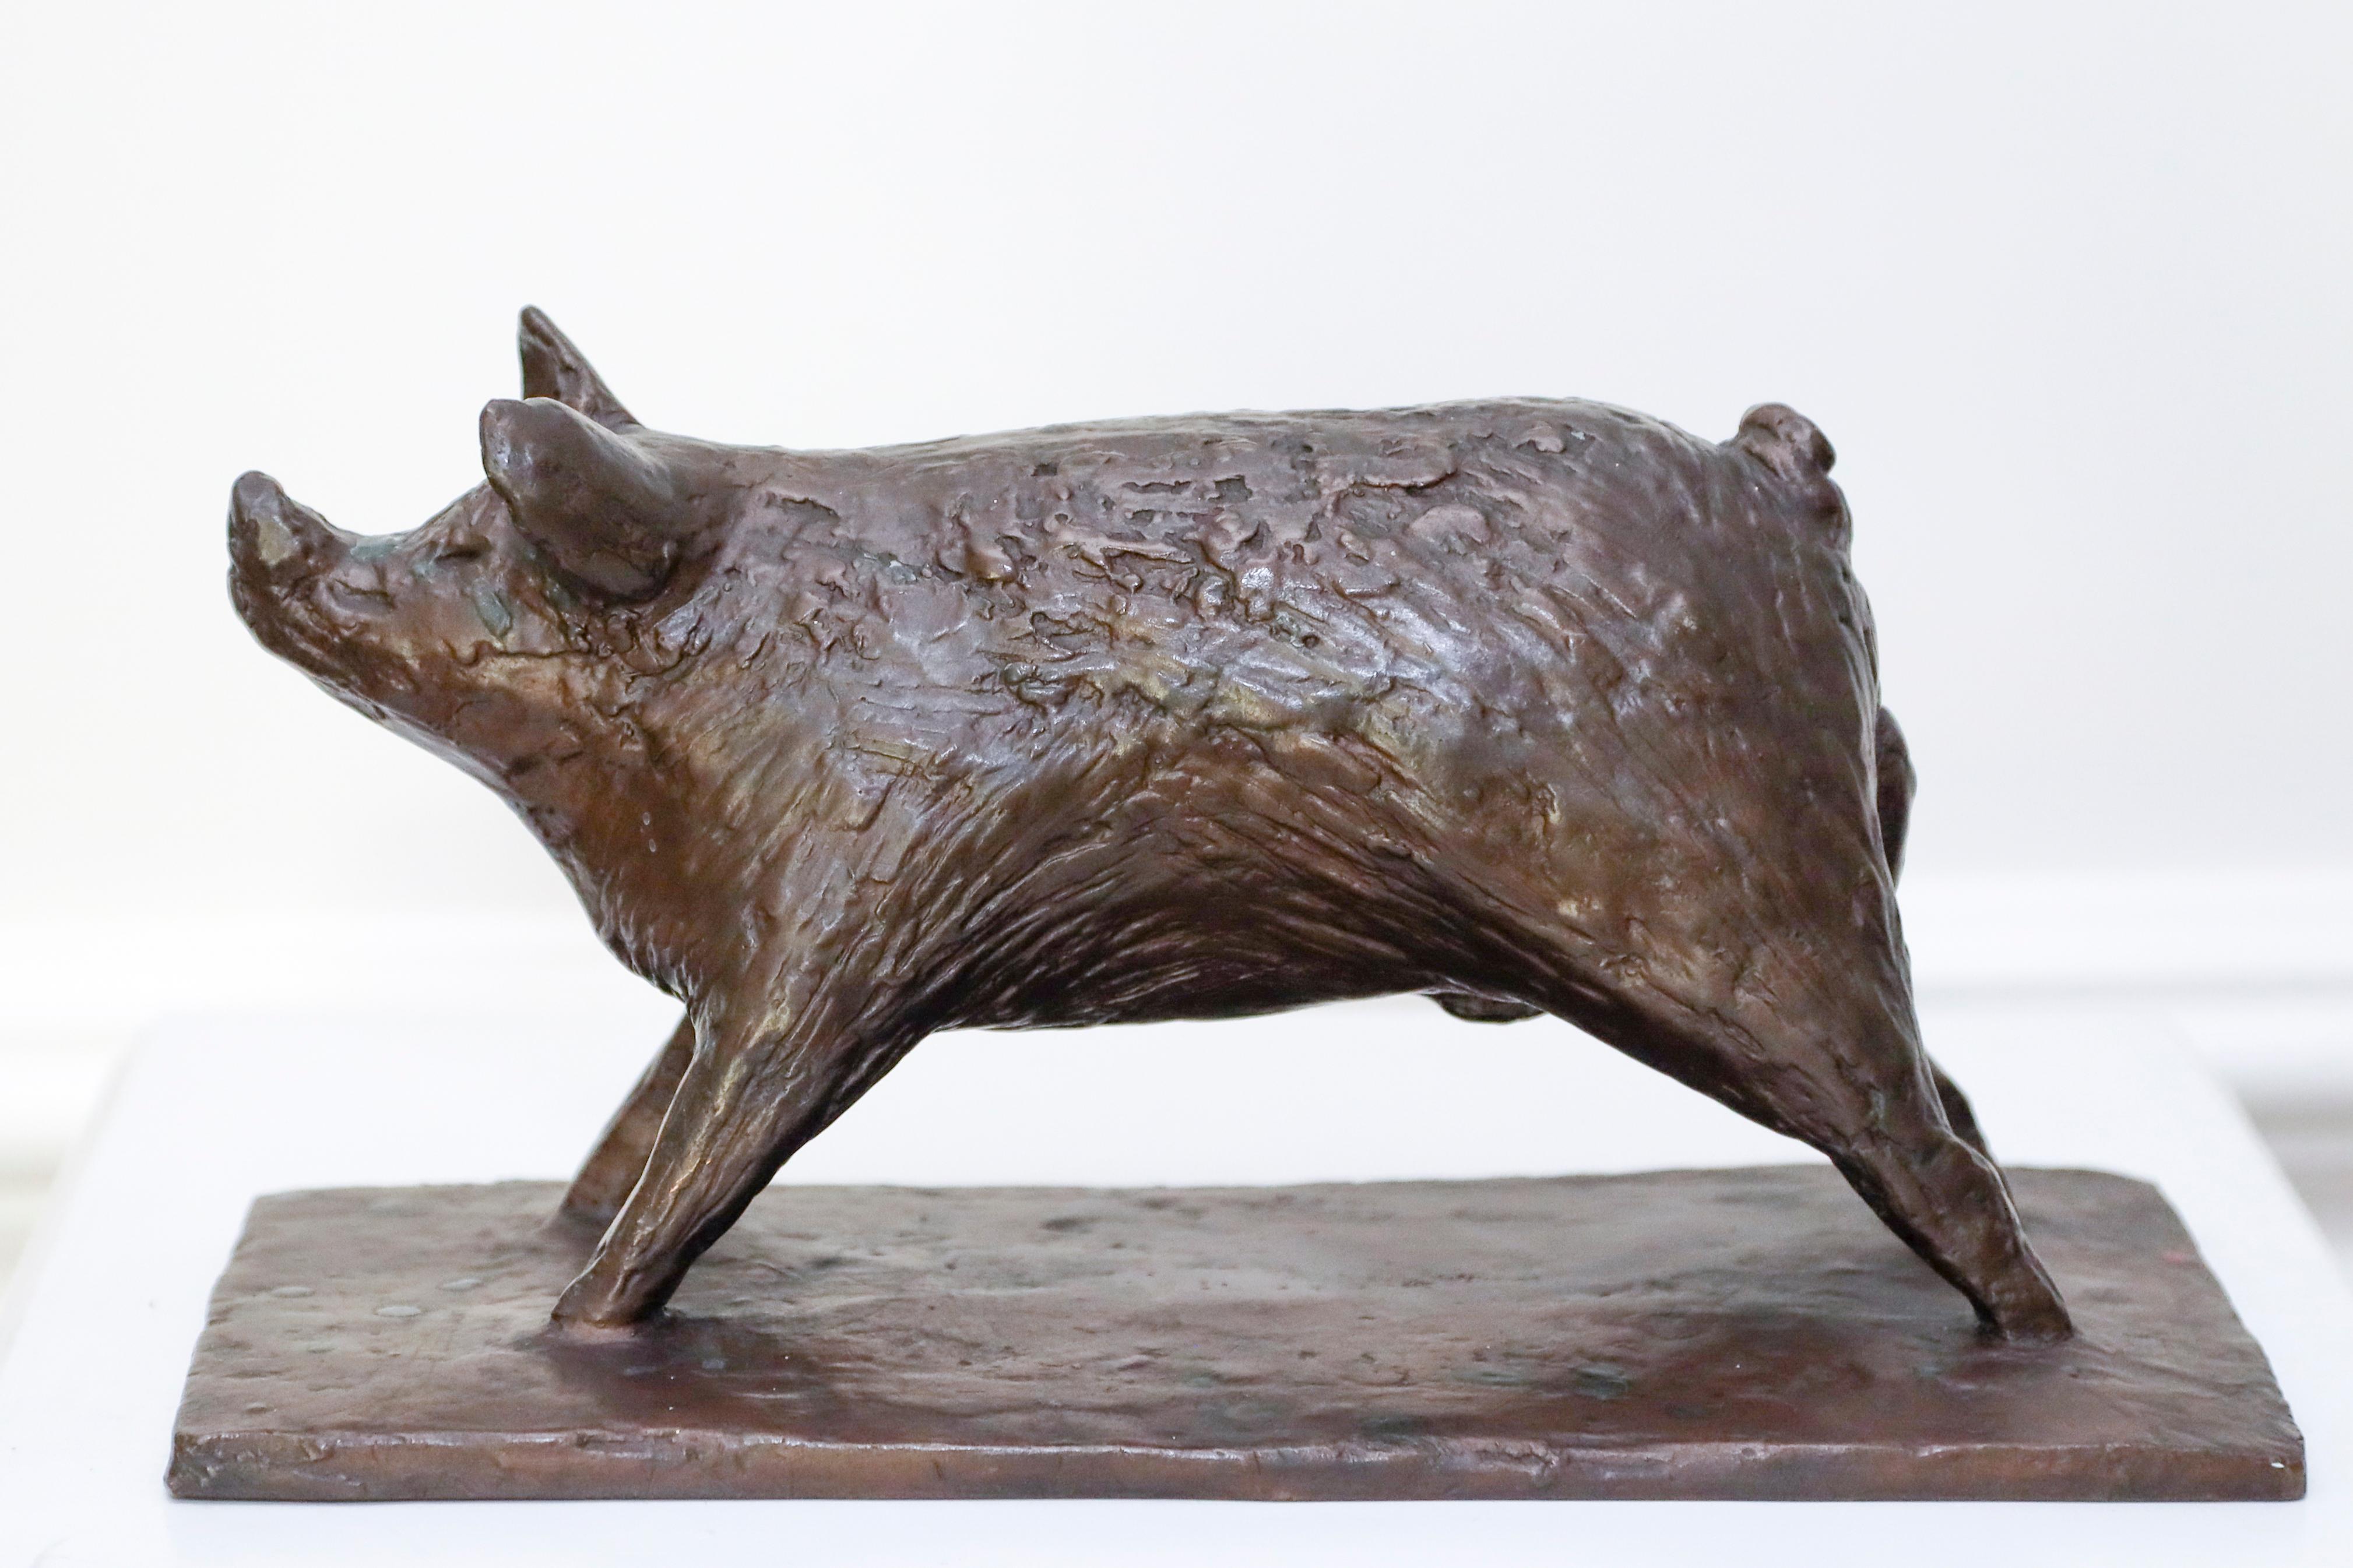 A lovely bronze sculpture of a Boar, or Pig, nose up.  The artist, who died at age 98, worked with some of most notable sculptors of her time.  She sculpted along side Elizabeth Frink, studied under Bernard Meadows, who in turn worked with Henry